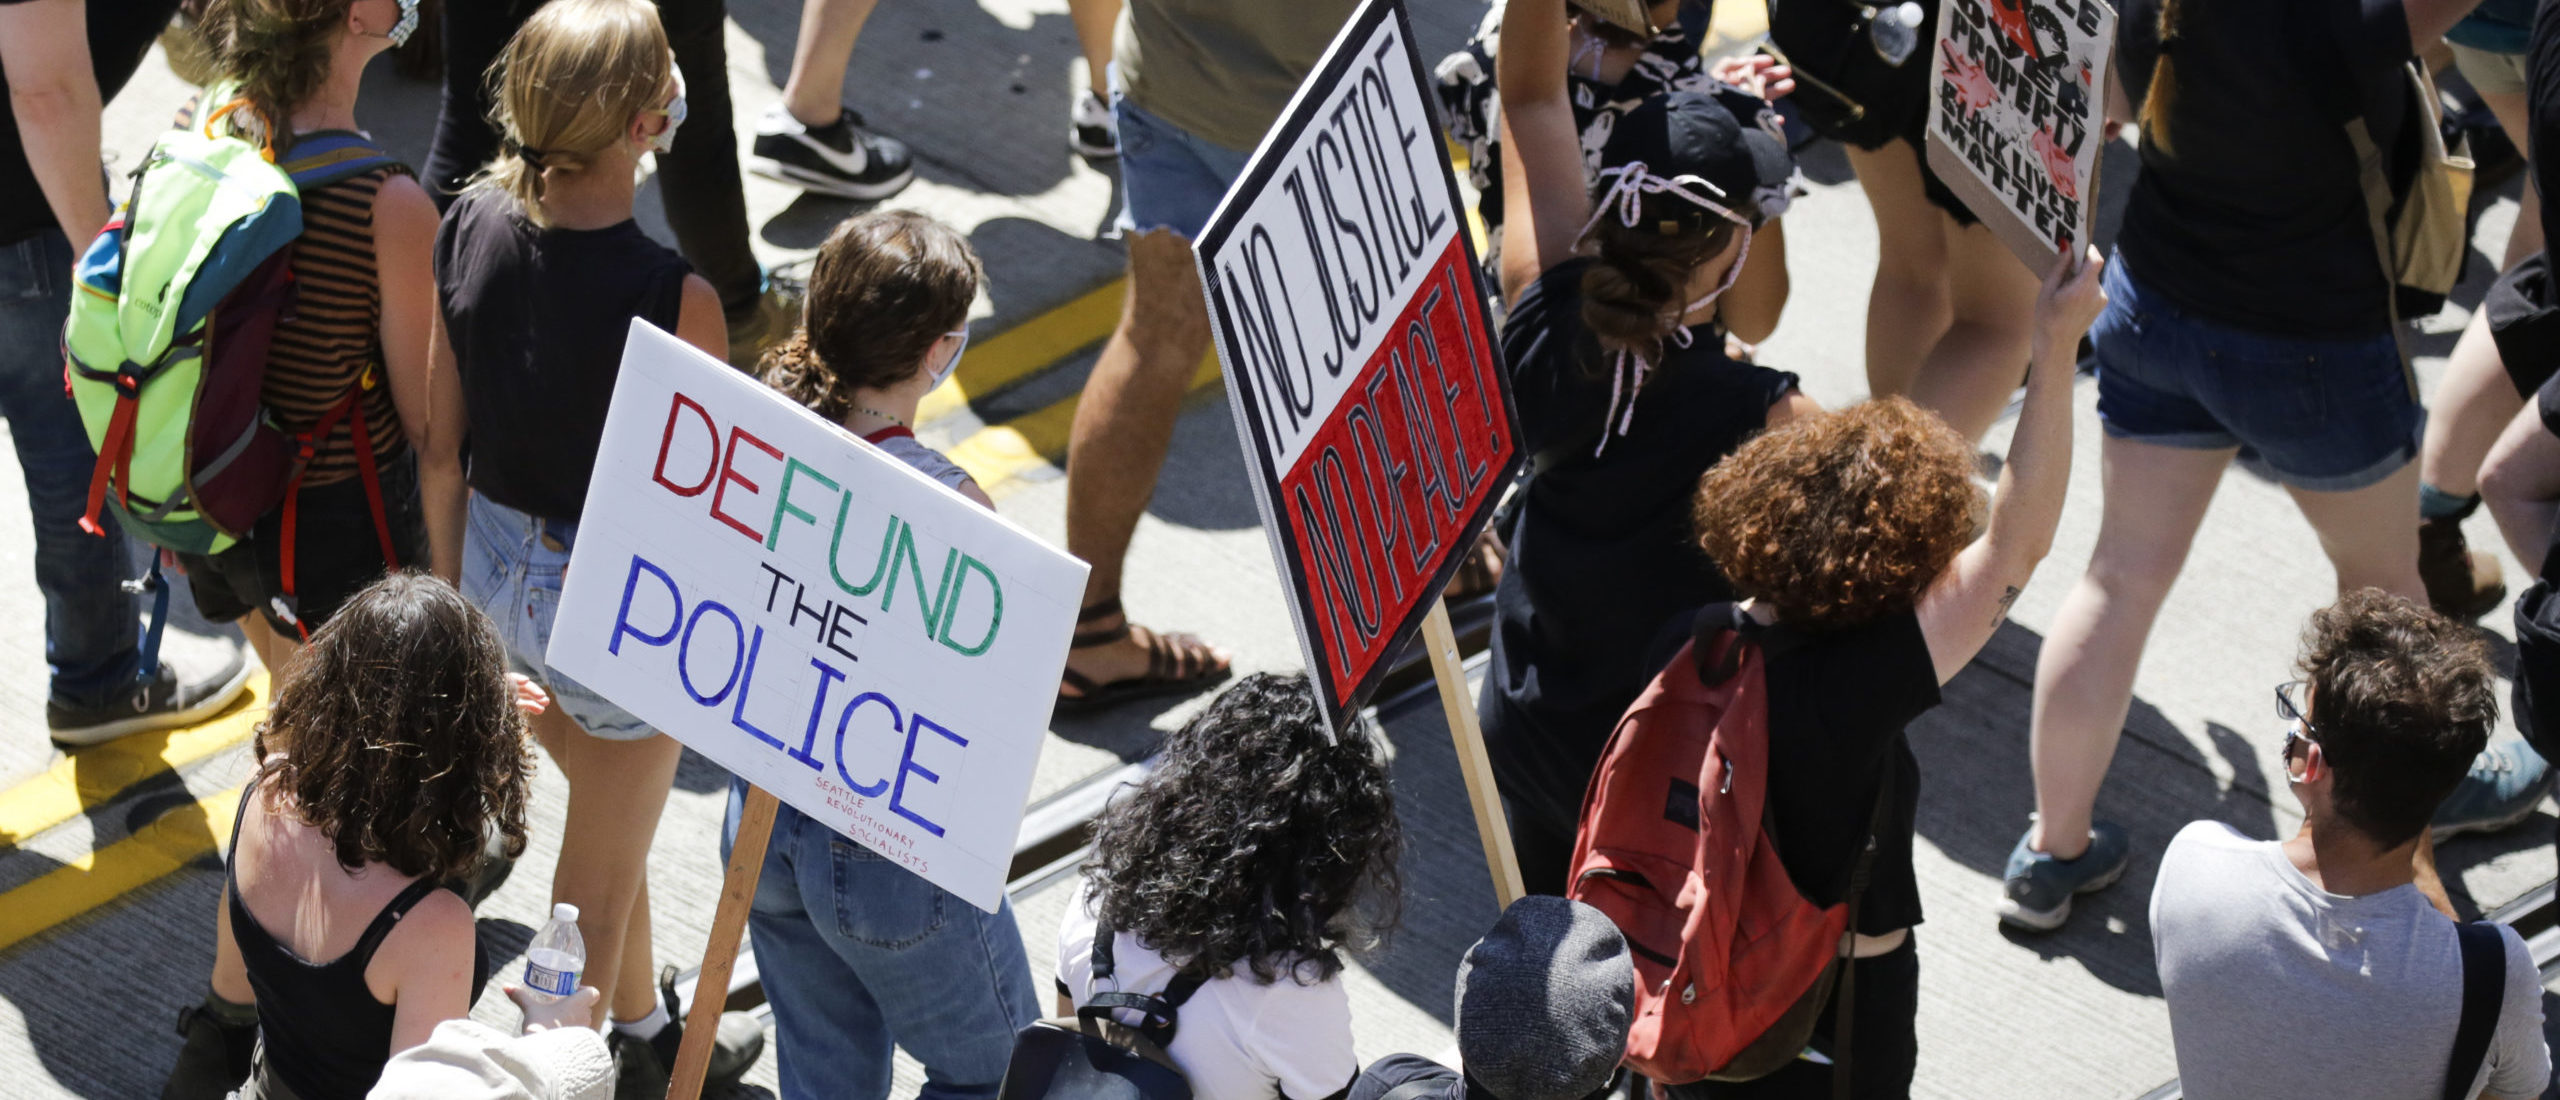 People carry signs during a "Defund the Police" march from King County Youth Jail to City Hall in Seattle, Washington on August 5, 2020. (Photo by Jason Redmond / AFP) (Photo by JASON REDMOND/AFP via Getty Images)